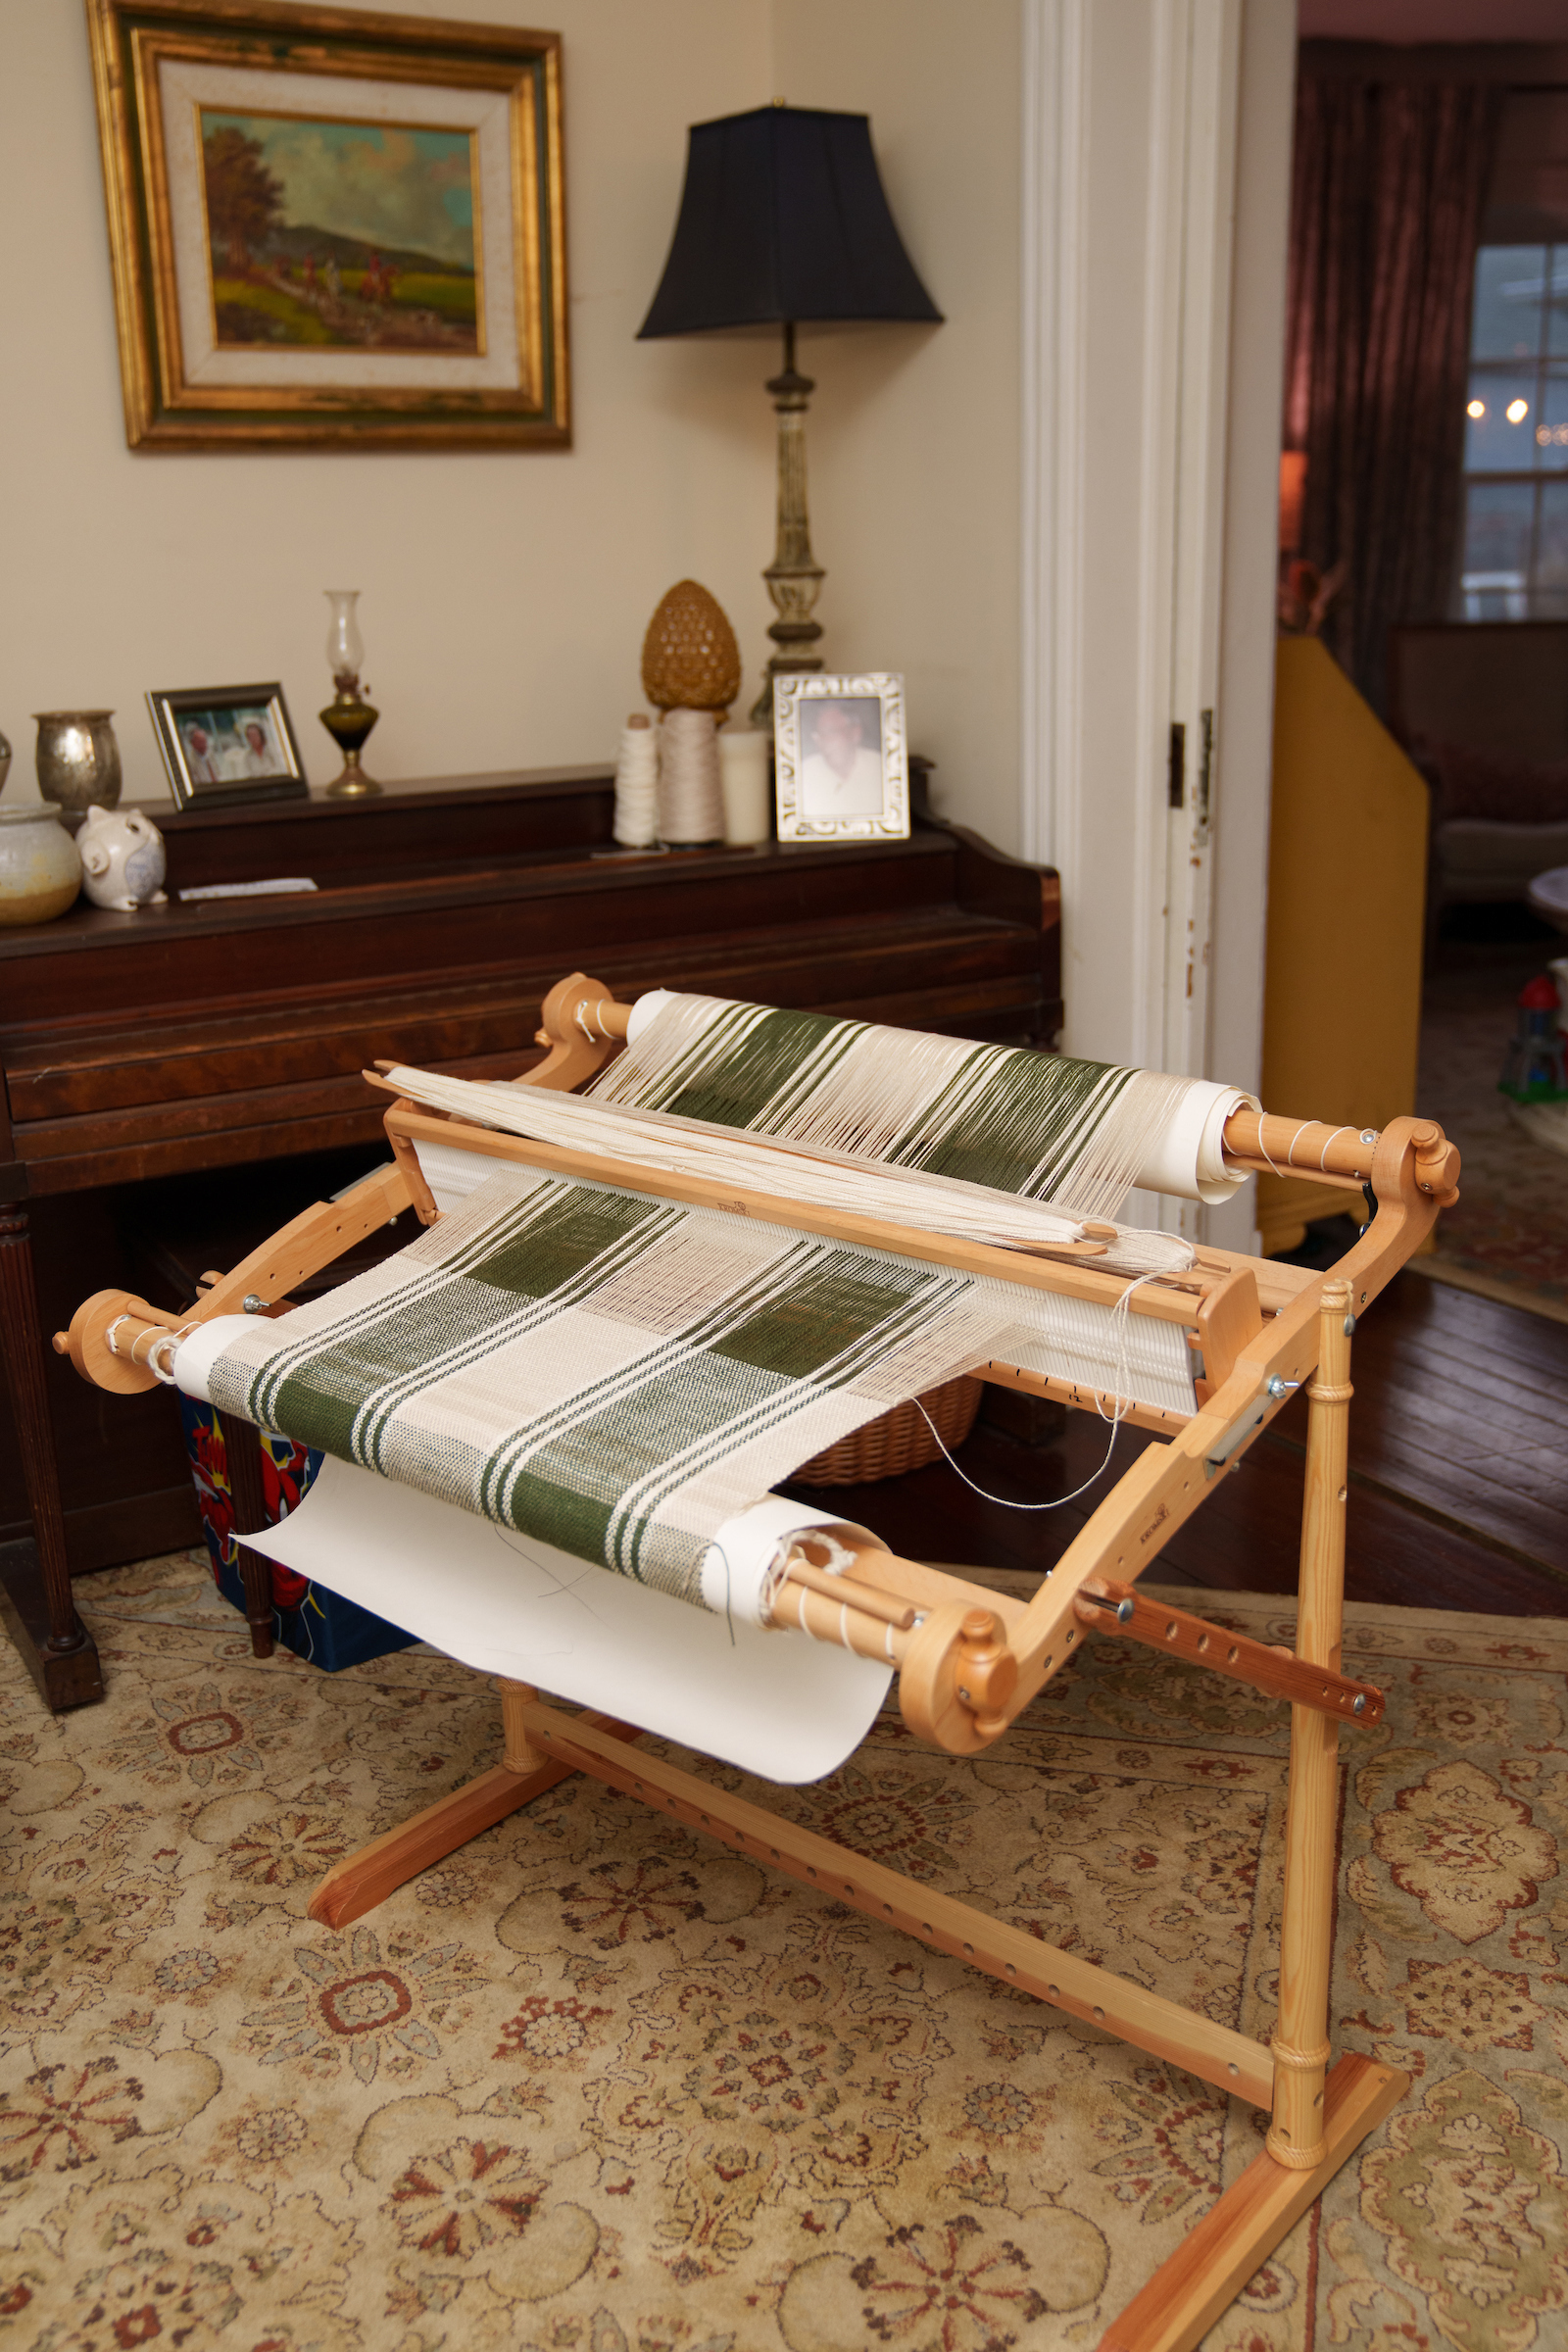 Loom weaving is another aspect of homesteading that Liz Sanicola has dived into.